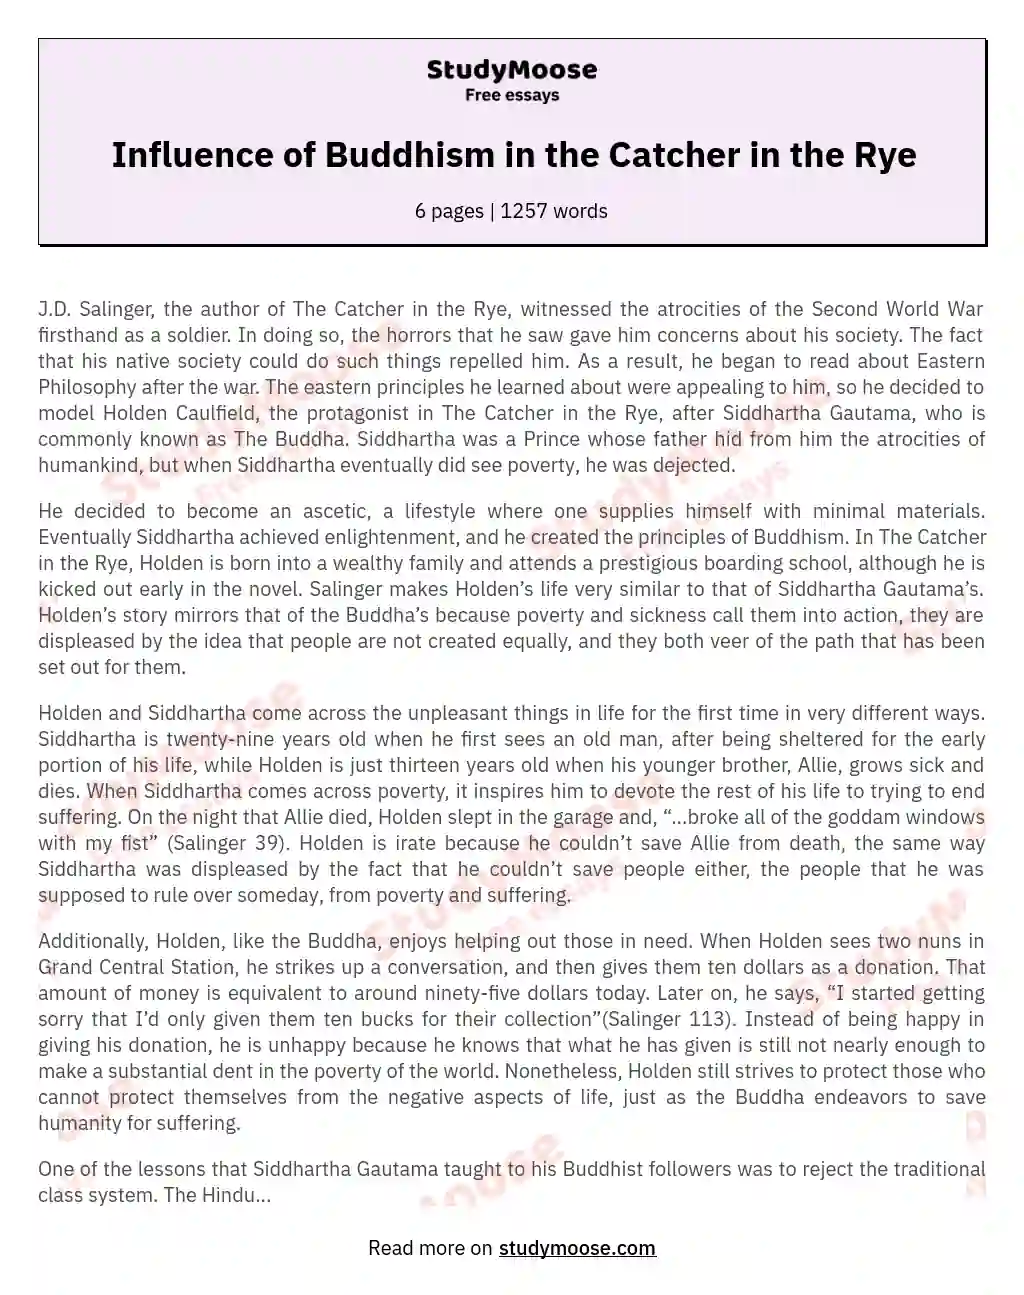 Influence of Buddhism in the Catcher in the Rye essay